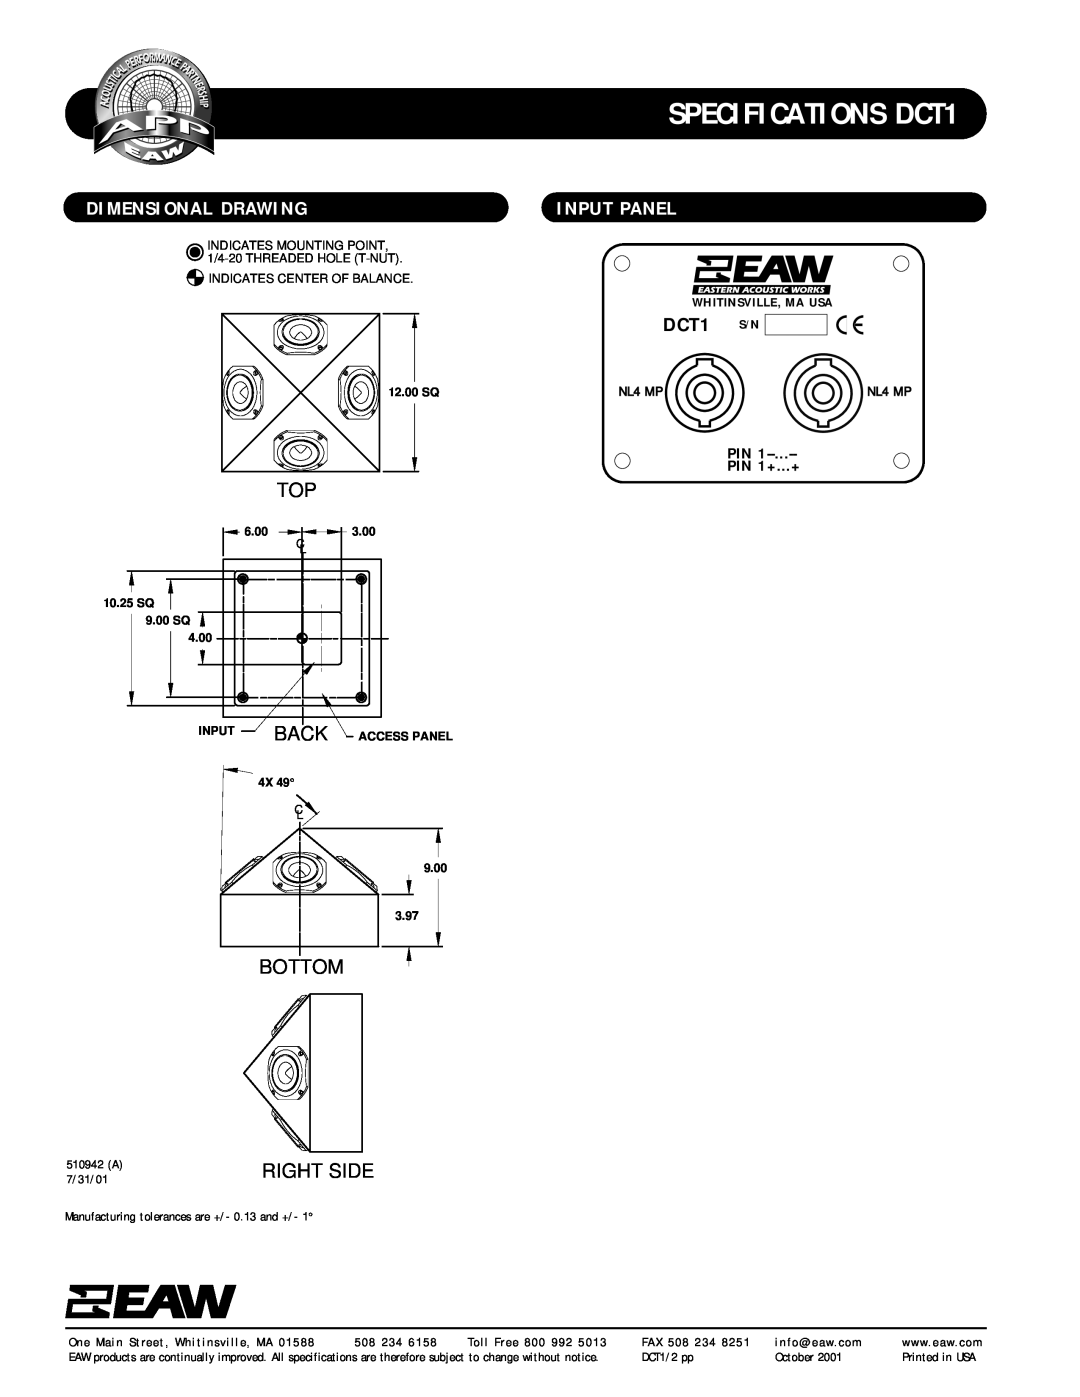 EAW Dimensional Drawing, Input Panel, SPECIFICATIONS DCT1, Bottom, Right Side, PIN PIN 1+...+, NL4 MP, 12.00 SQ, 6.00 